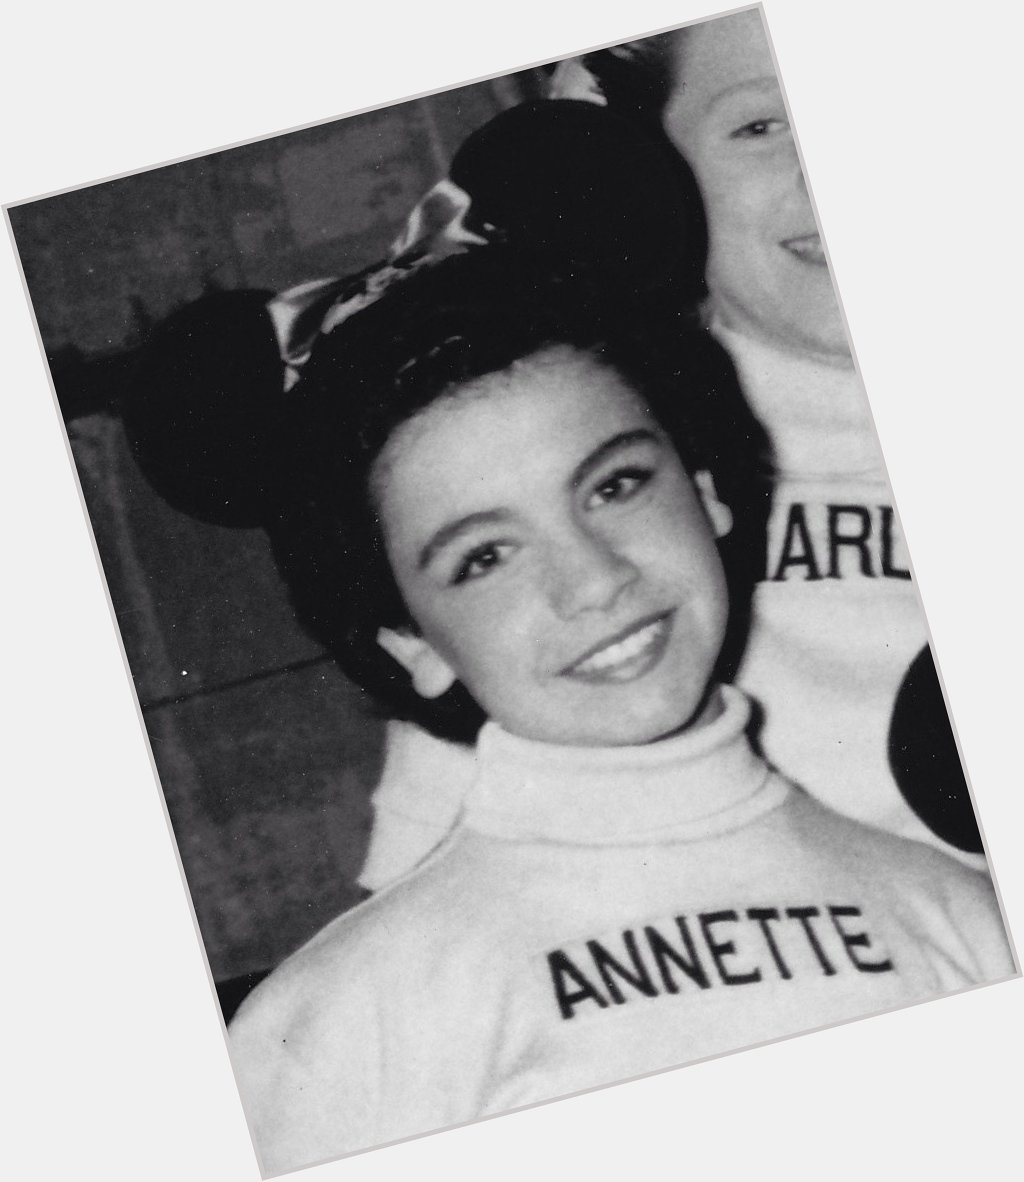 Happy Belopian Birthday to Annette Funicello born on this day in 1942.  